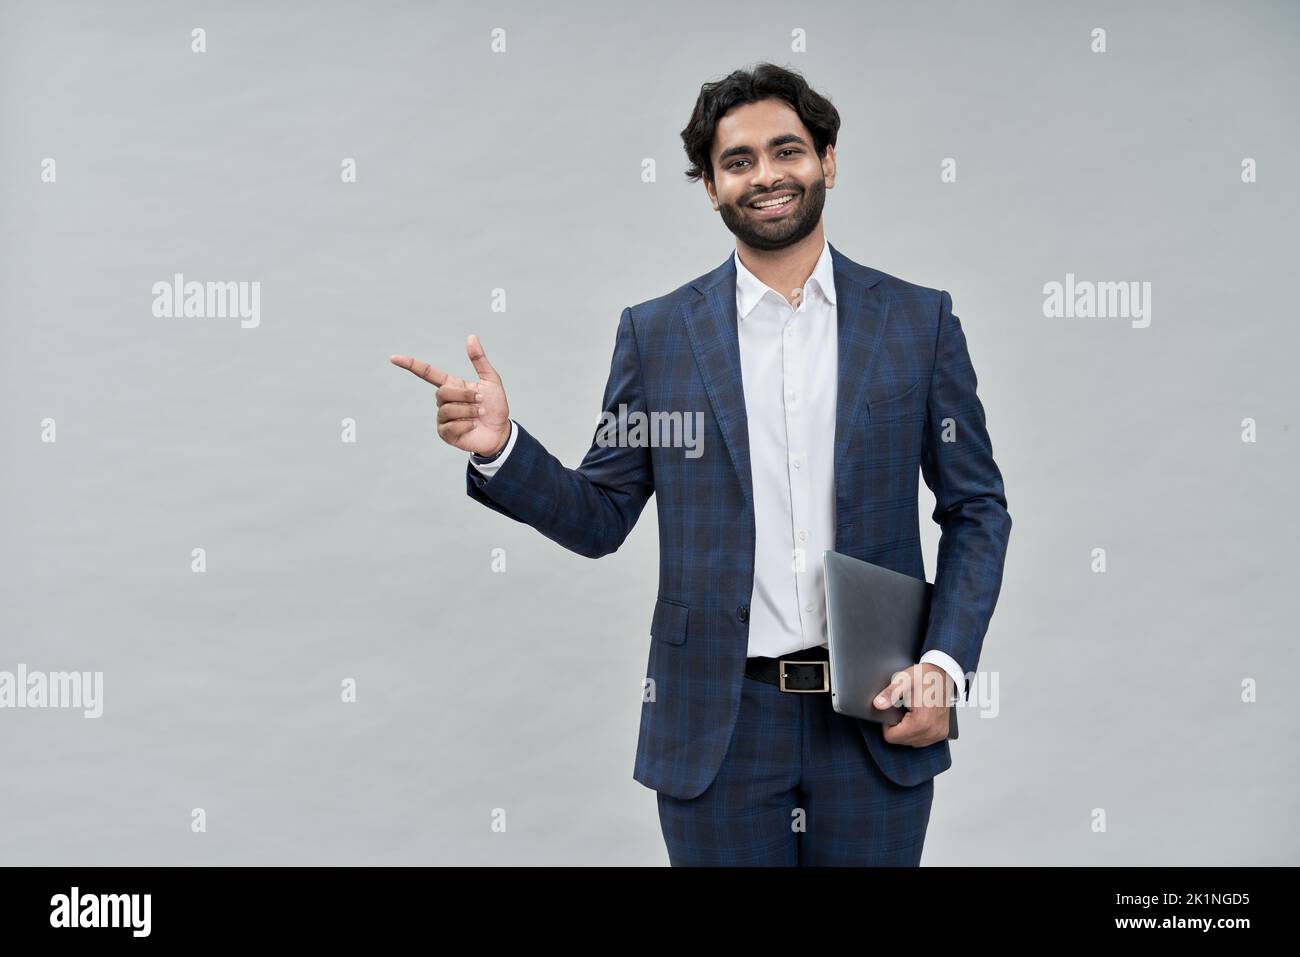 Smiling young indian arab business man wearing suit pointing isolated, portrait. Stock Photo